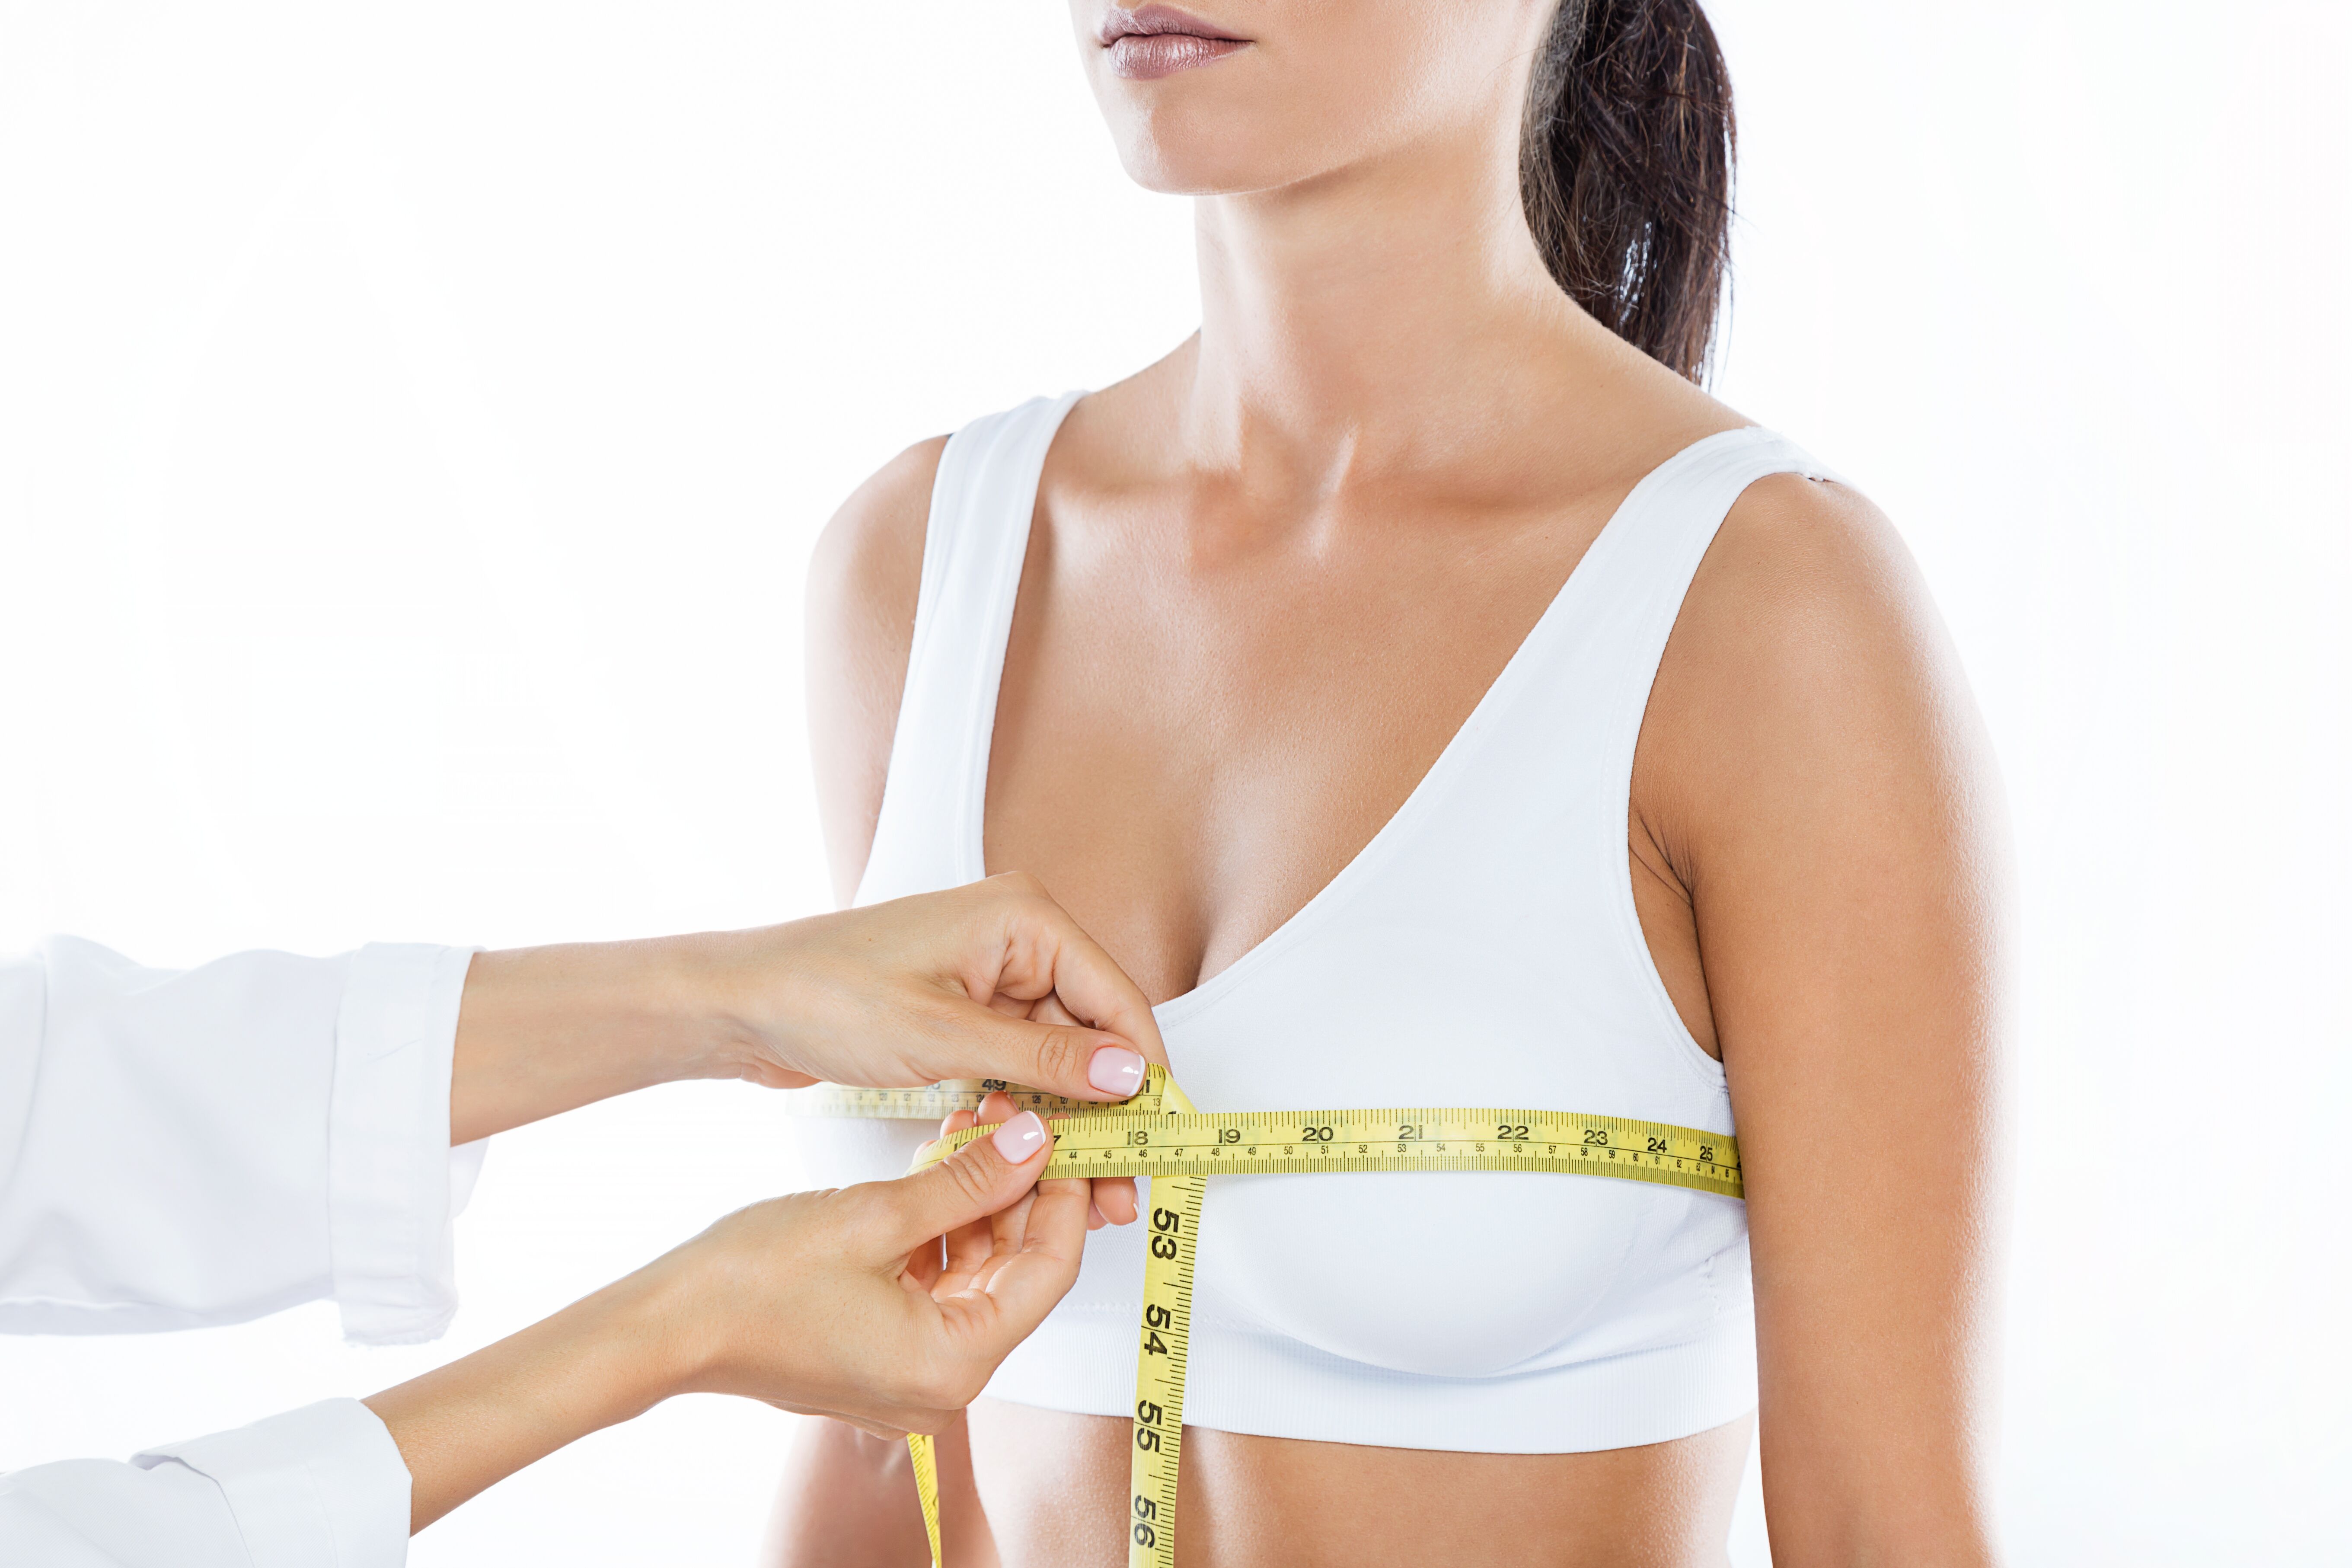 Can You Reduce Your Breasts With Dieting and Exercise?